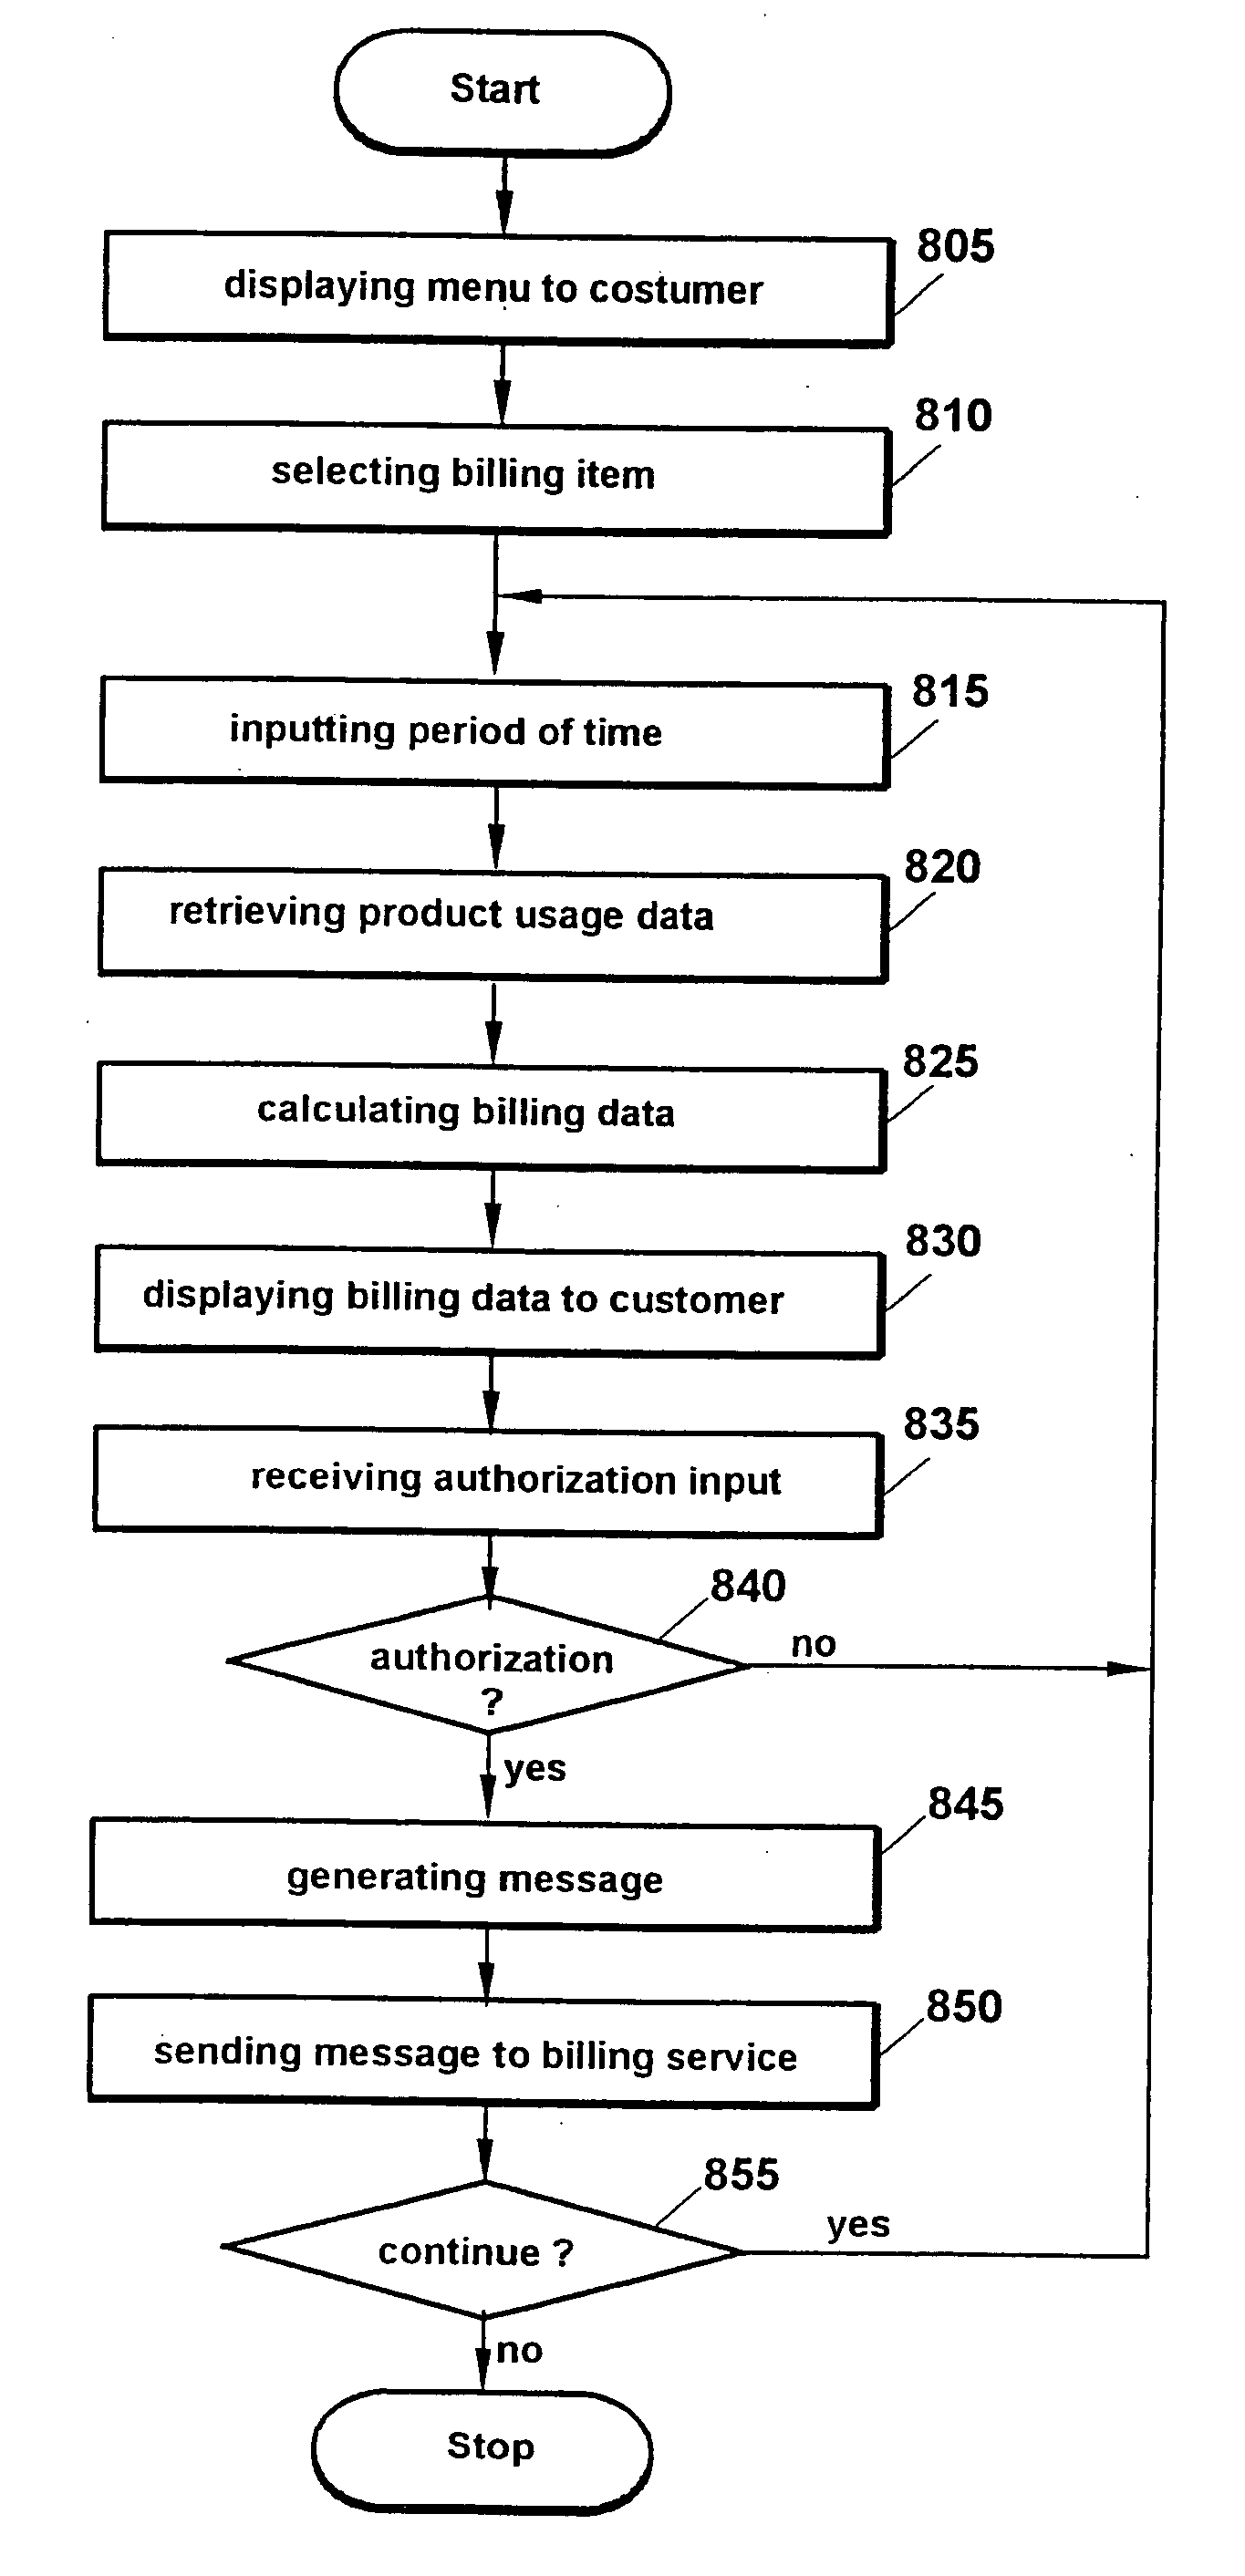 Billing process for printing systems